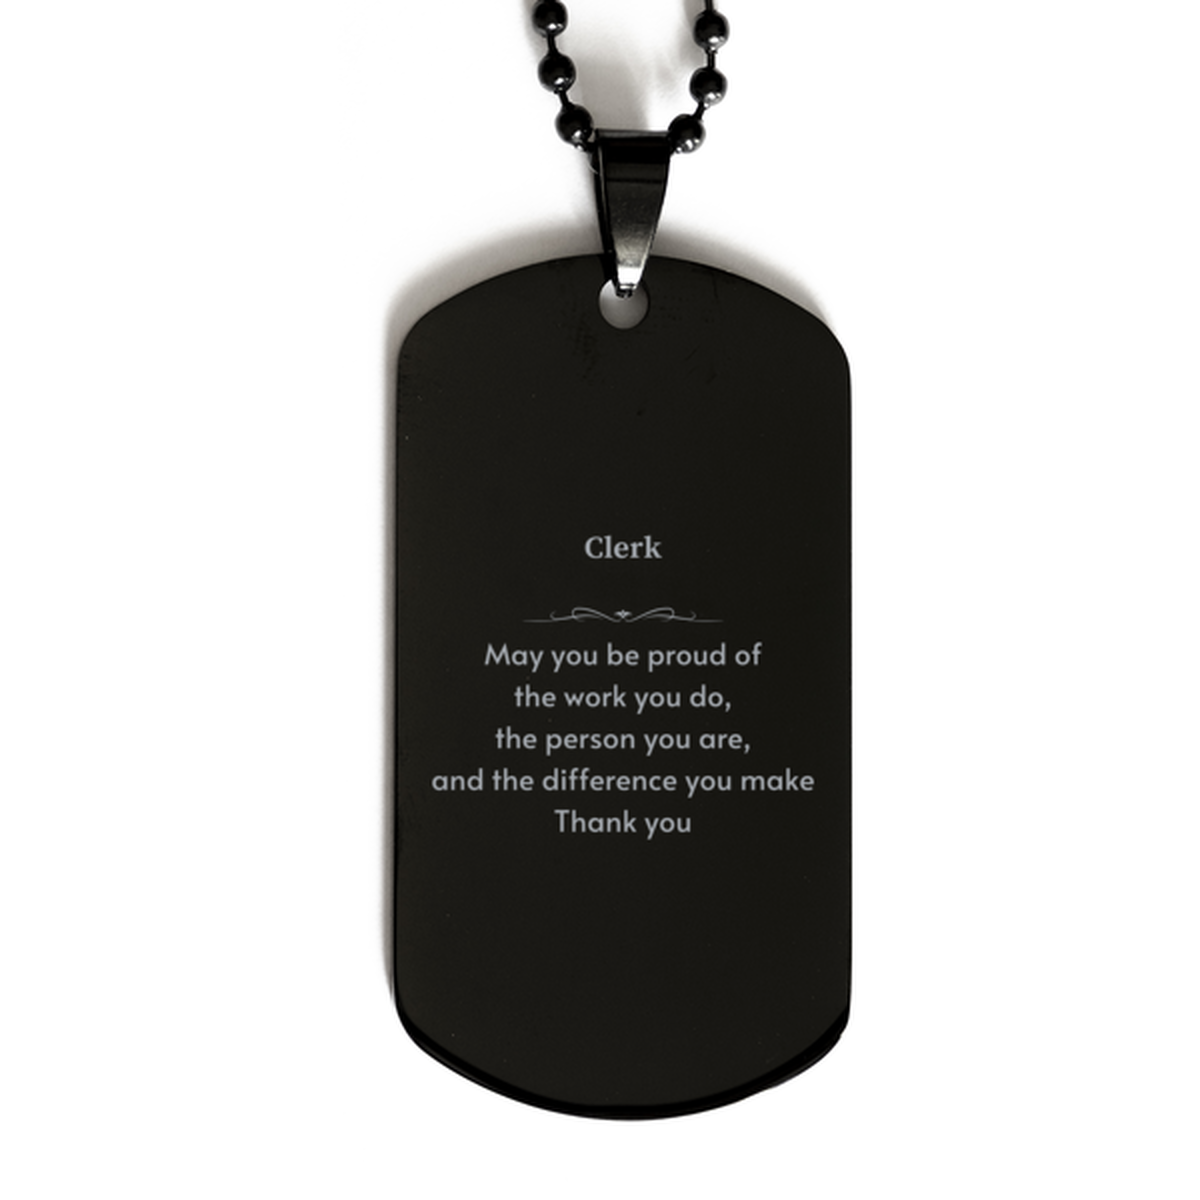 Heartwarming Black Dog Tag Retirement Coworkers Gifts for Clerk, Clerk May You be proud of the work you do, the person you are Gifts for Boss Men Women Friends